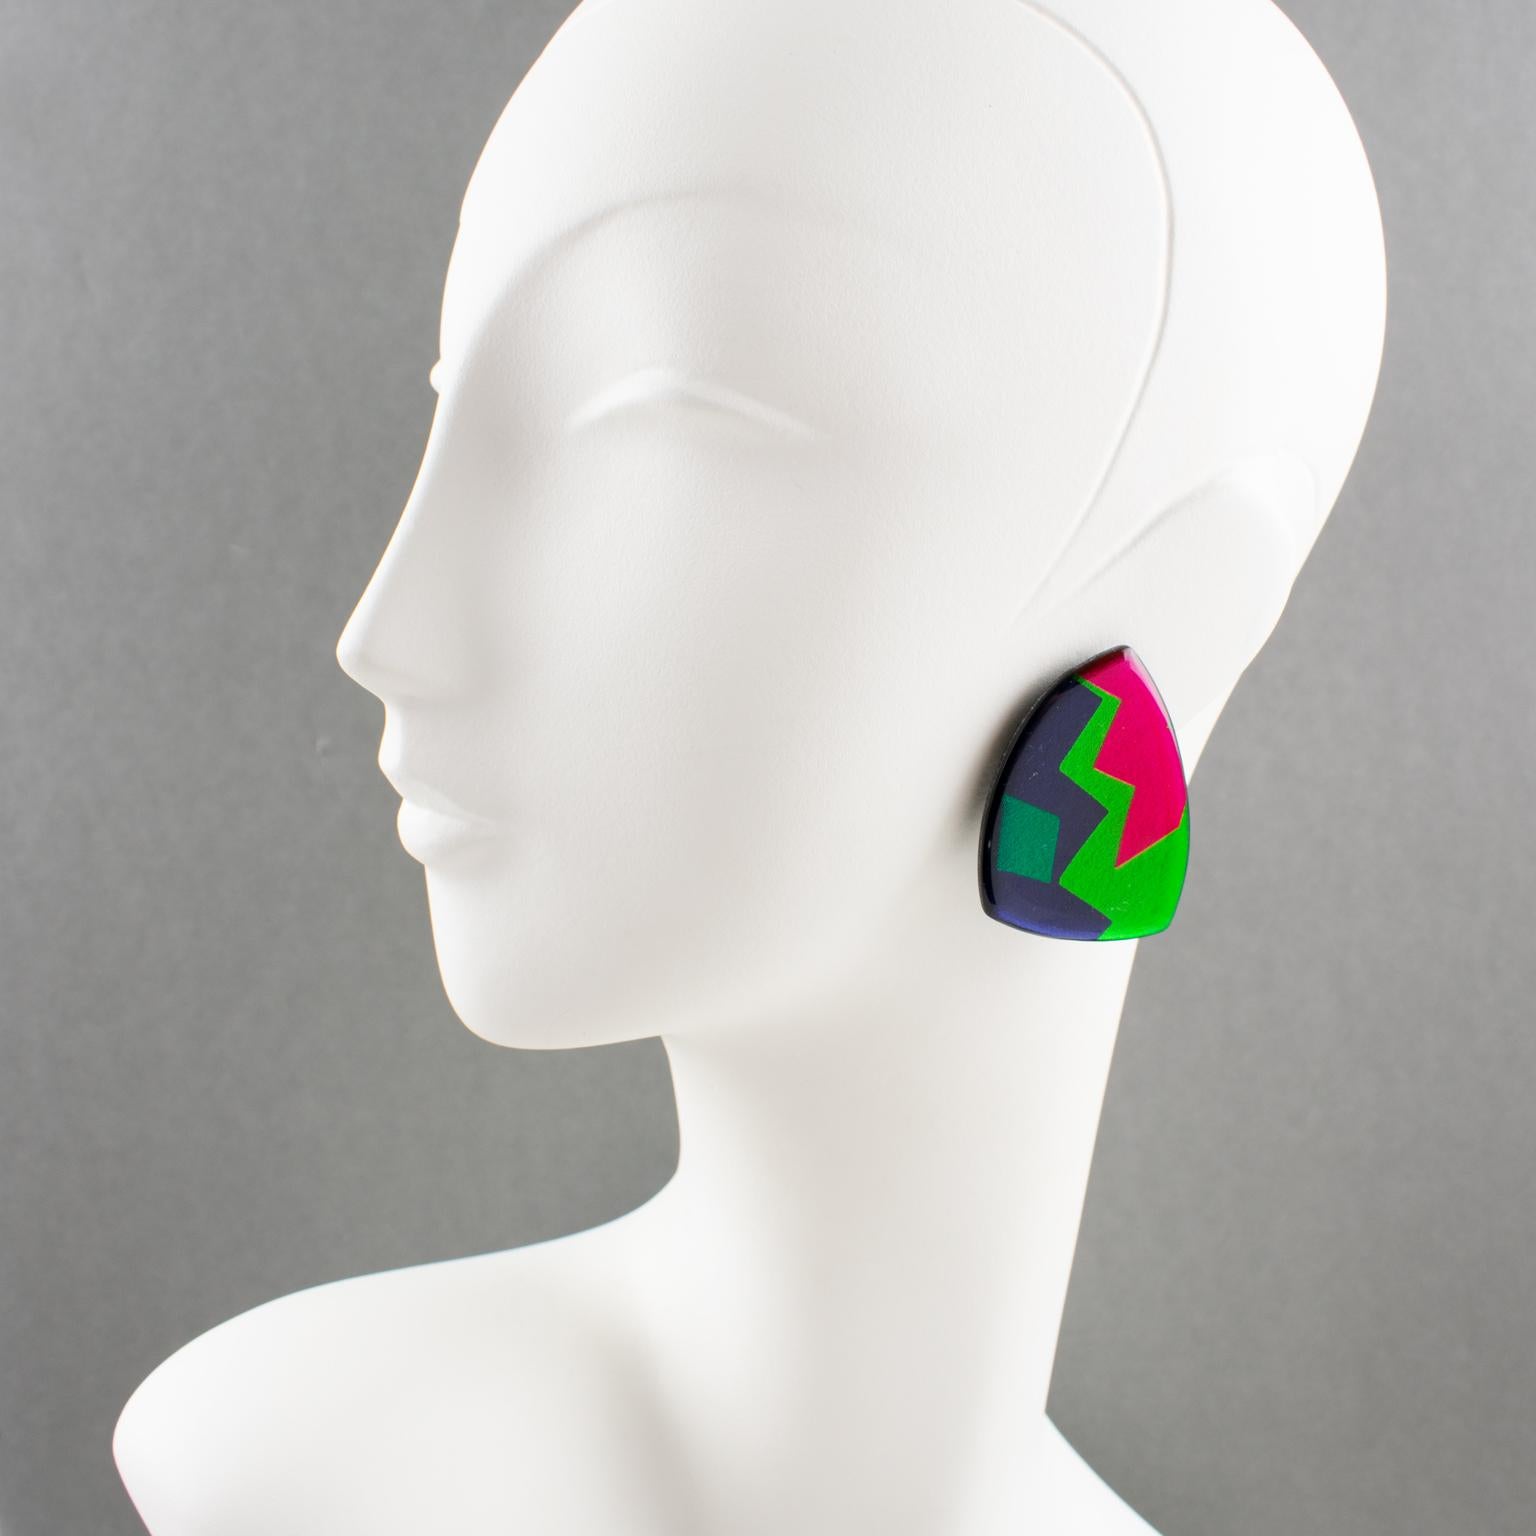 Lovely Italian designer studio Lucite or resin dangling clip-on earrings. Geometric triangle design with emerald green, green grass, hot pink, and cobalt blue colors with mirror effect and textured pattern. Total eye-catching Pop Art statement